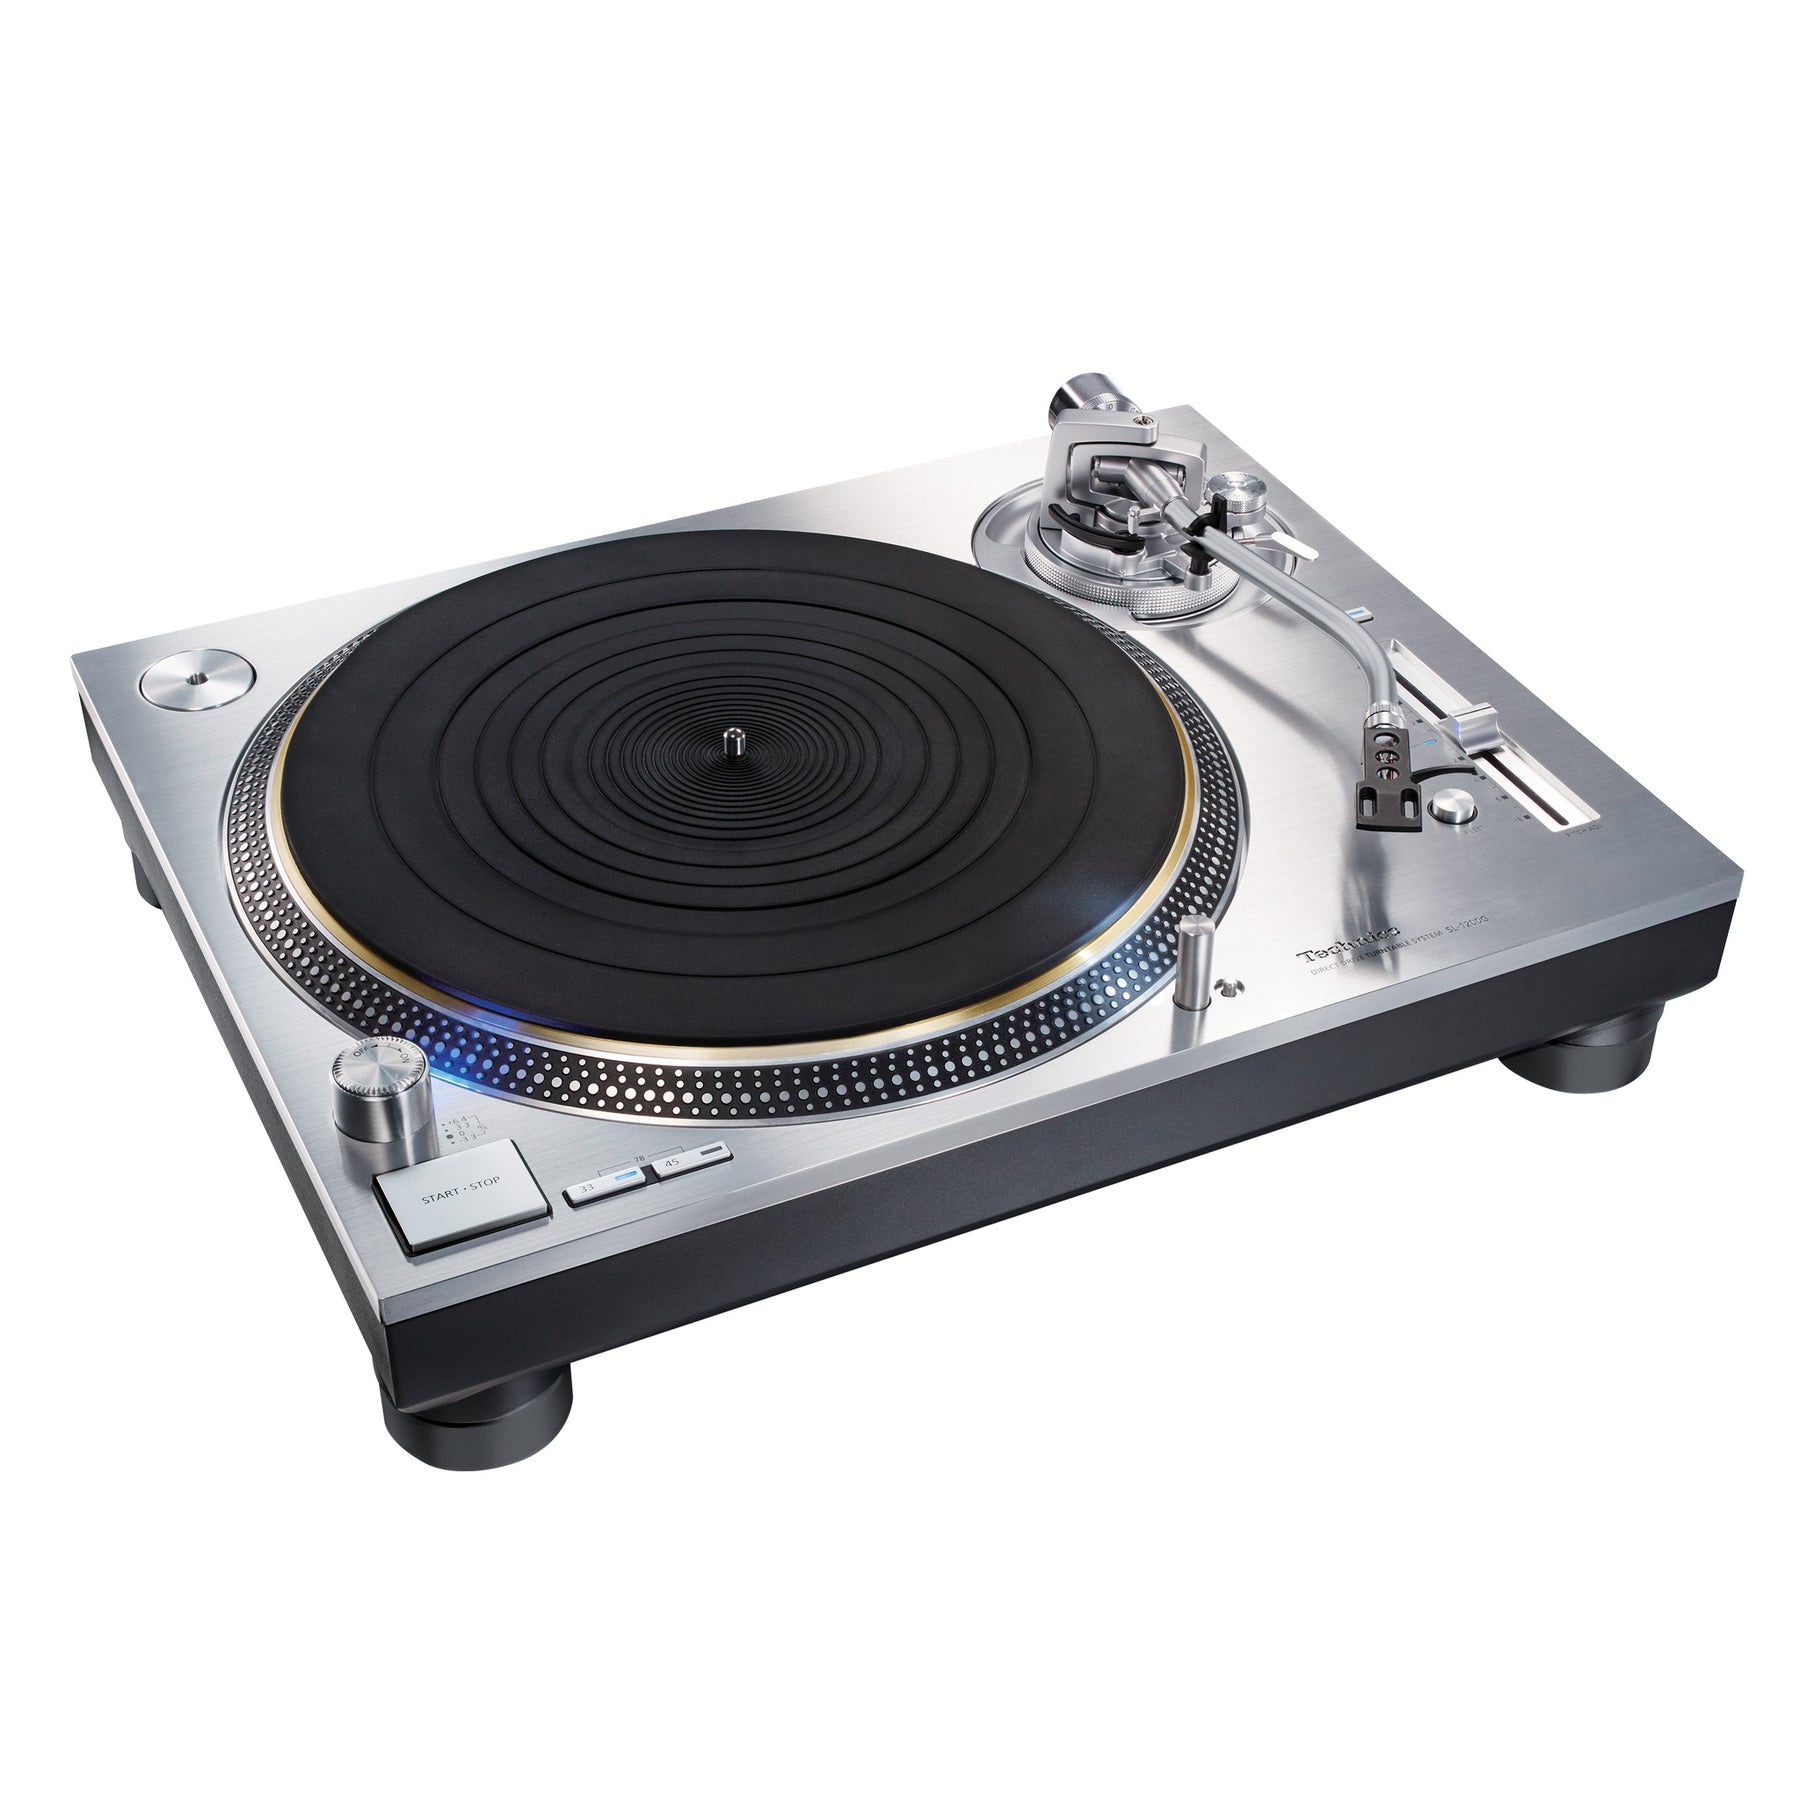 Direct Drive Turntable System SL-1200G-S